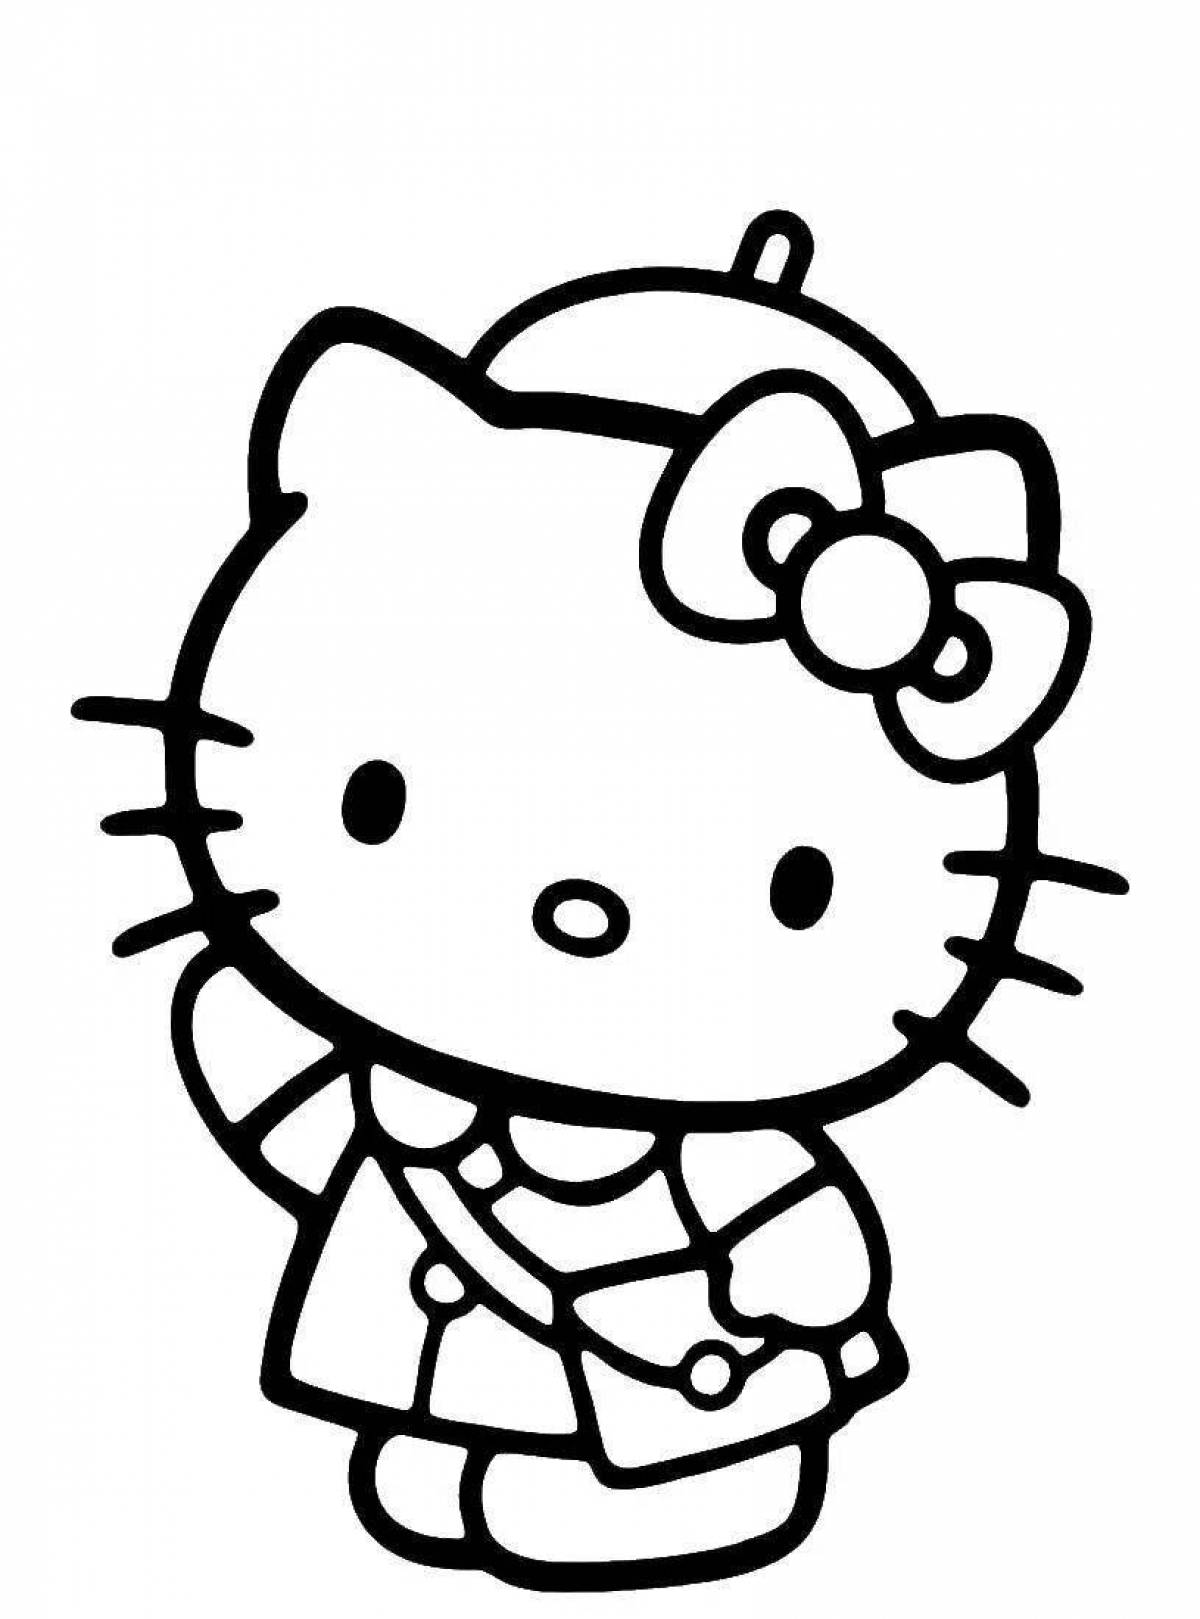 Playful astro kitty coloring page